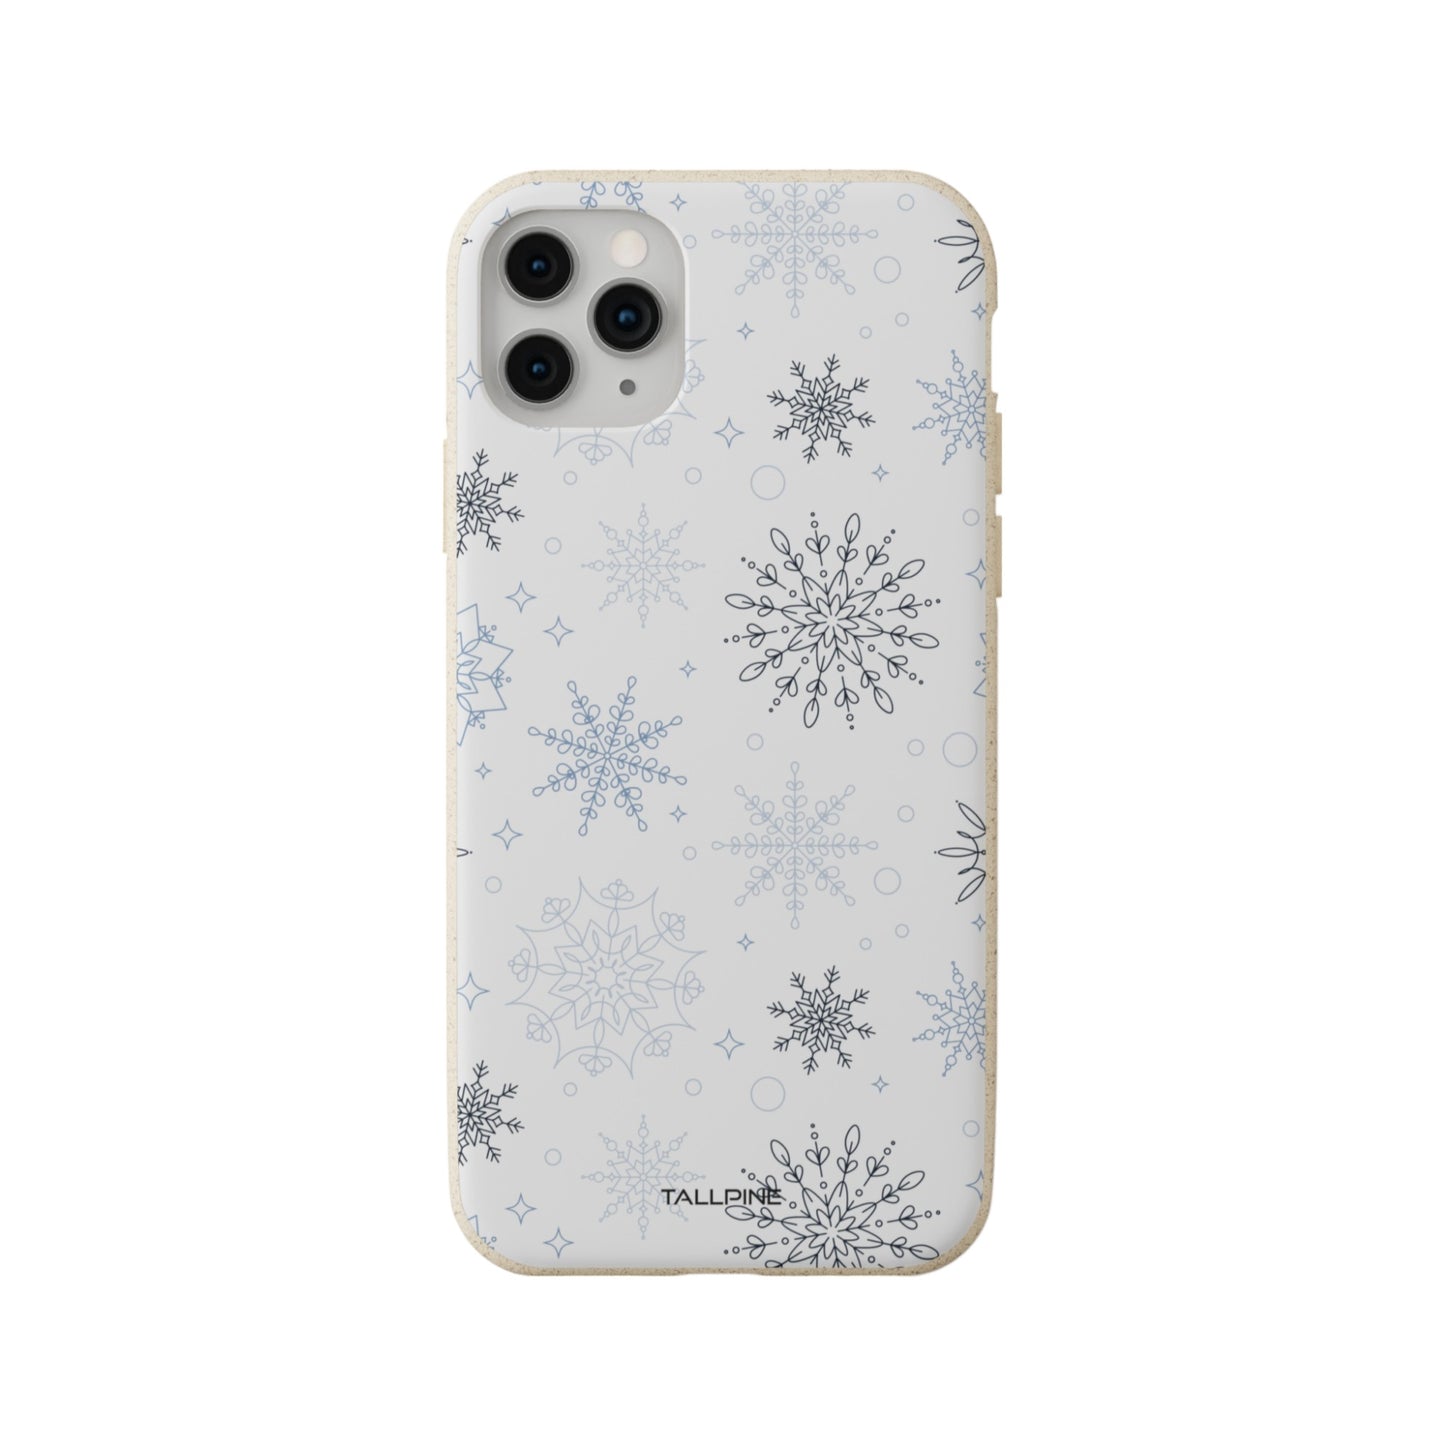 Winter Daybreak - Eco Case iPhone 11 Pro Max - Tallpine Cases | Sustainable and Eco-Friendly - Abstract New